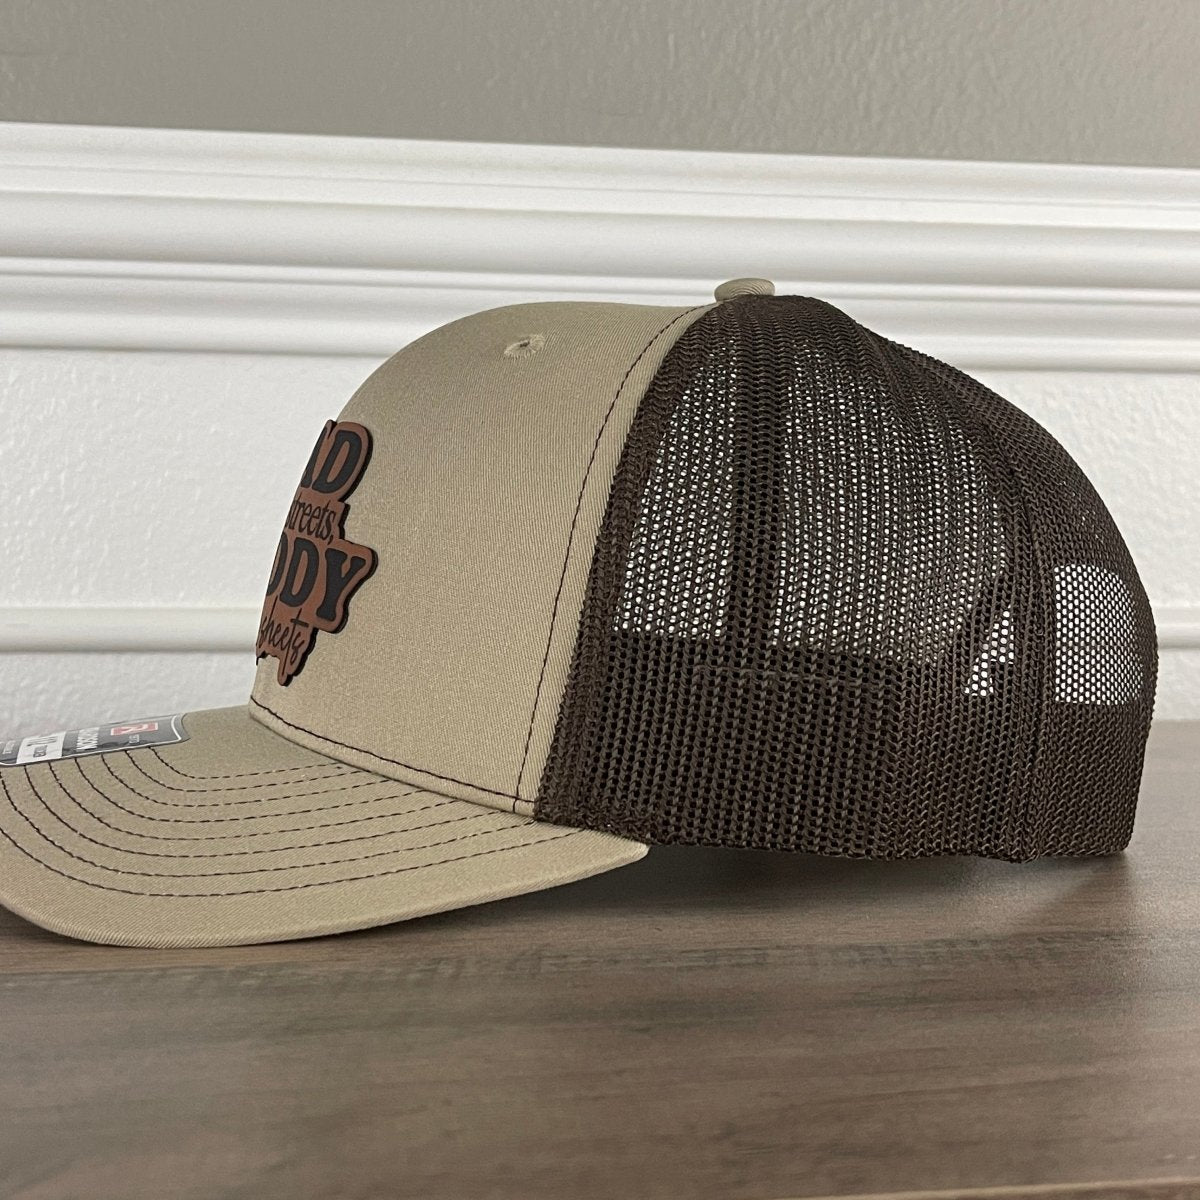 Dad In The Streets Daddy In The Sheets Funny Front Leather Patch Hat Khaki/Brown Patch Hat - VividEditions